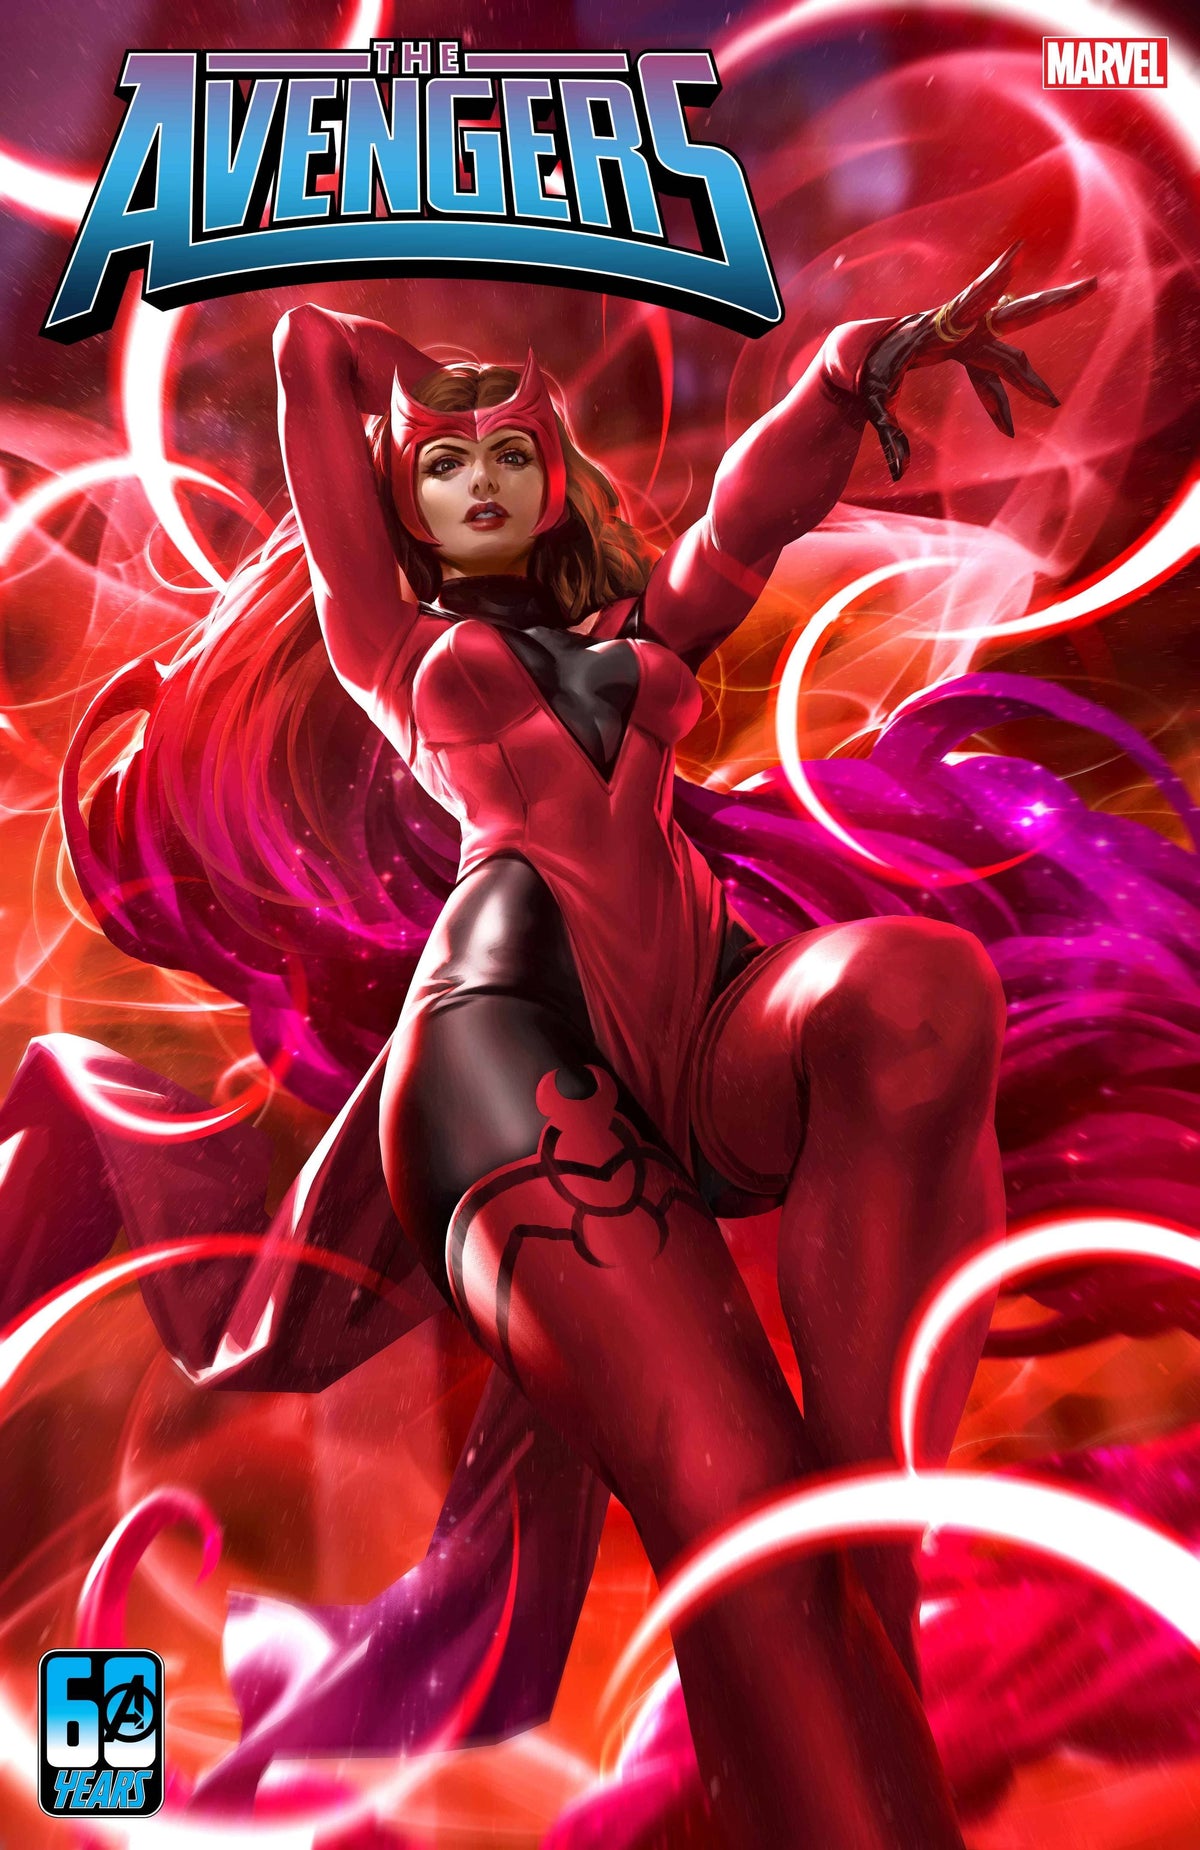 Scarlet Witch #9 Preview - The Comic Book Dispatch